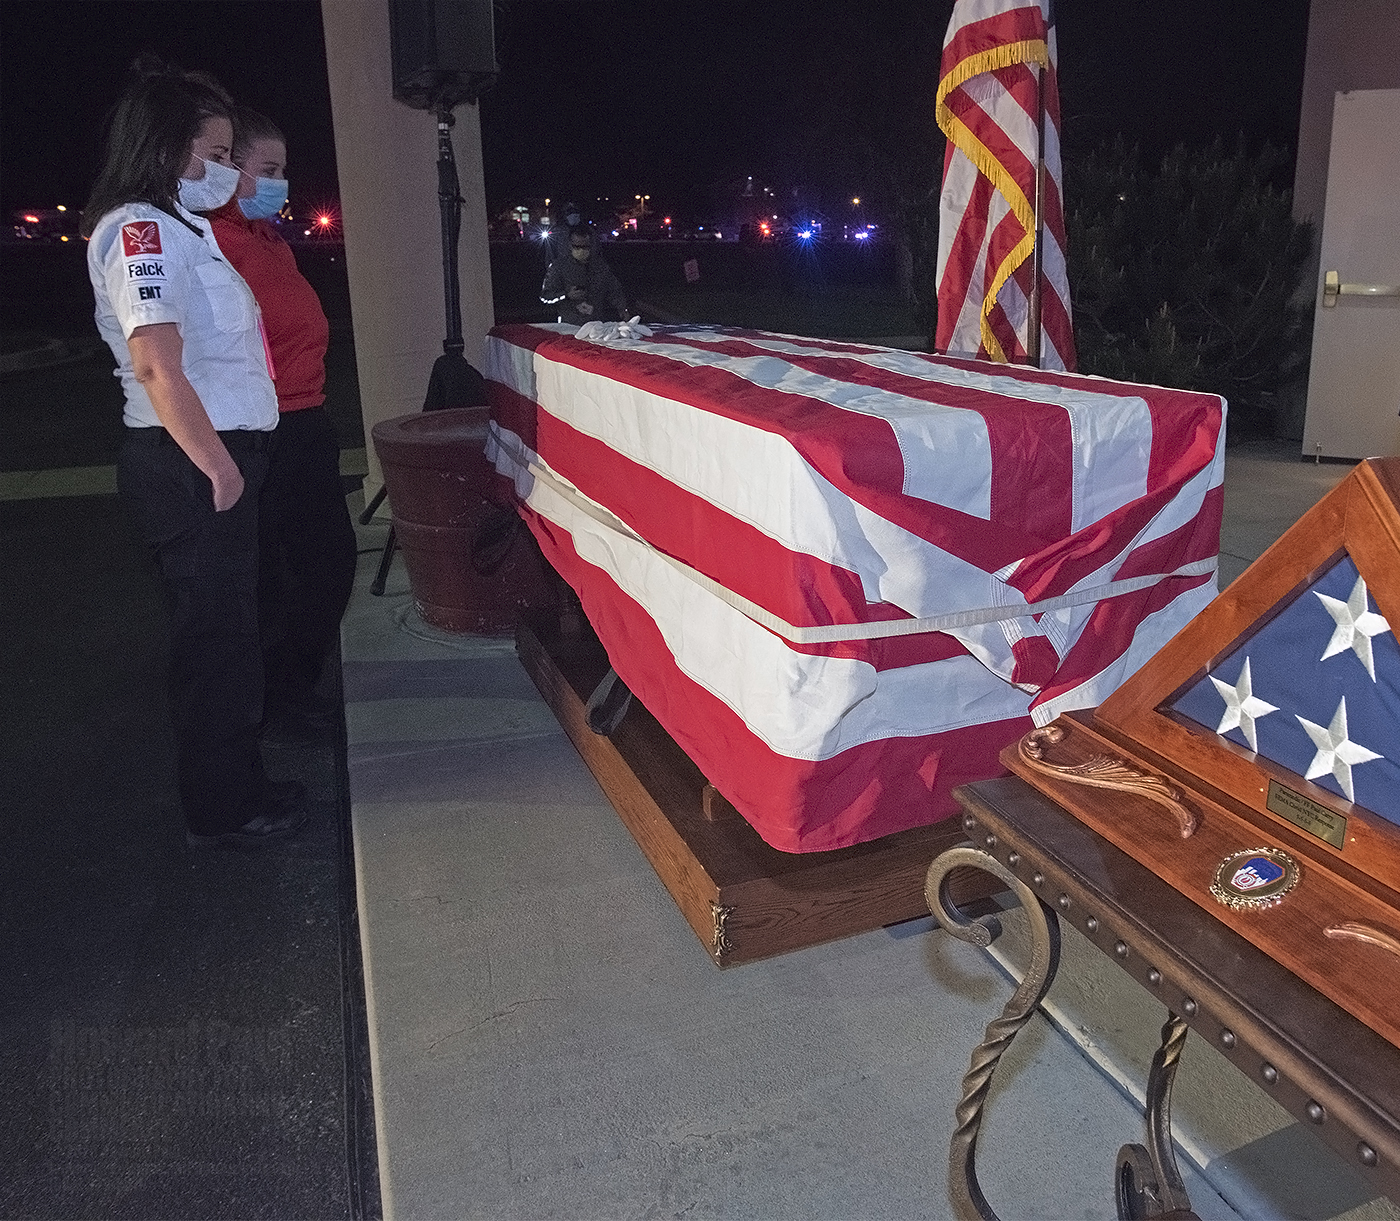 Falck-Colorado and Stadium Medical employees pay their last respects to Paul Cary. To the right is an American flag presented by the Fire Department of New York.